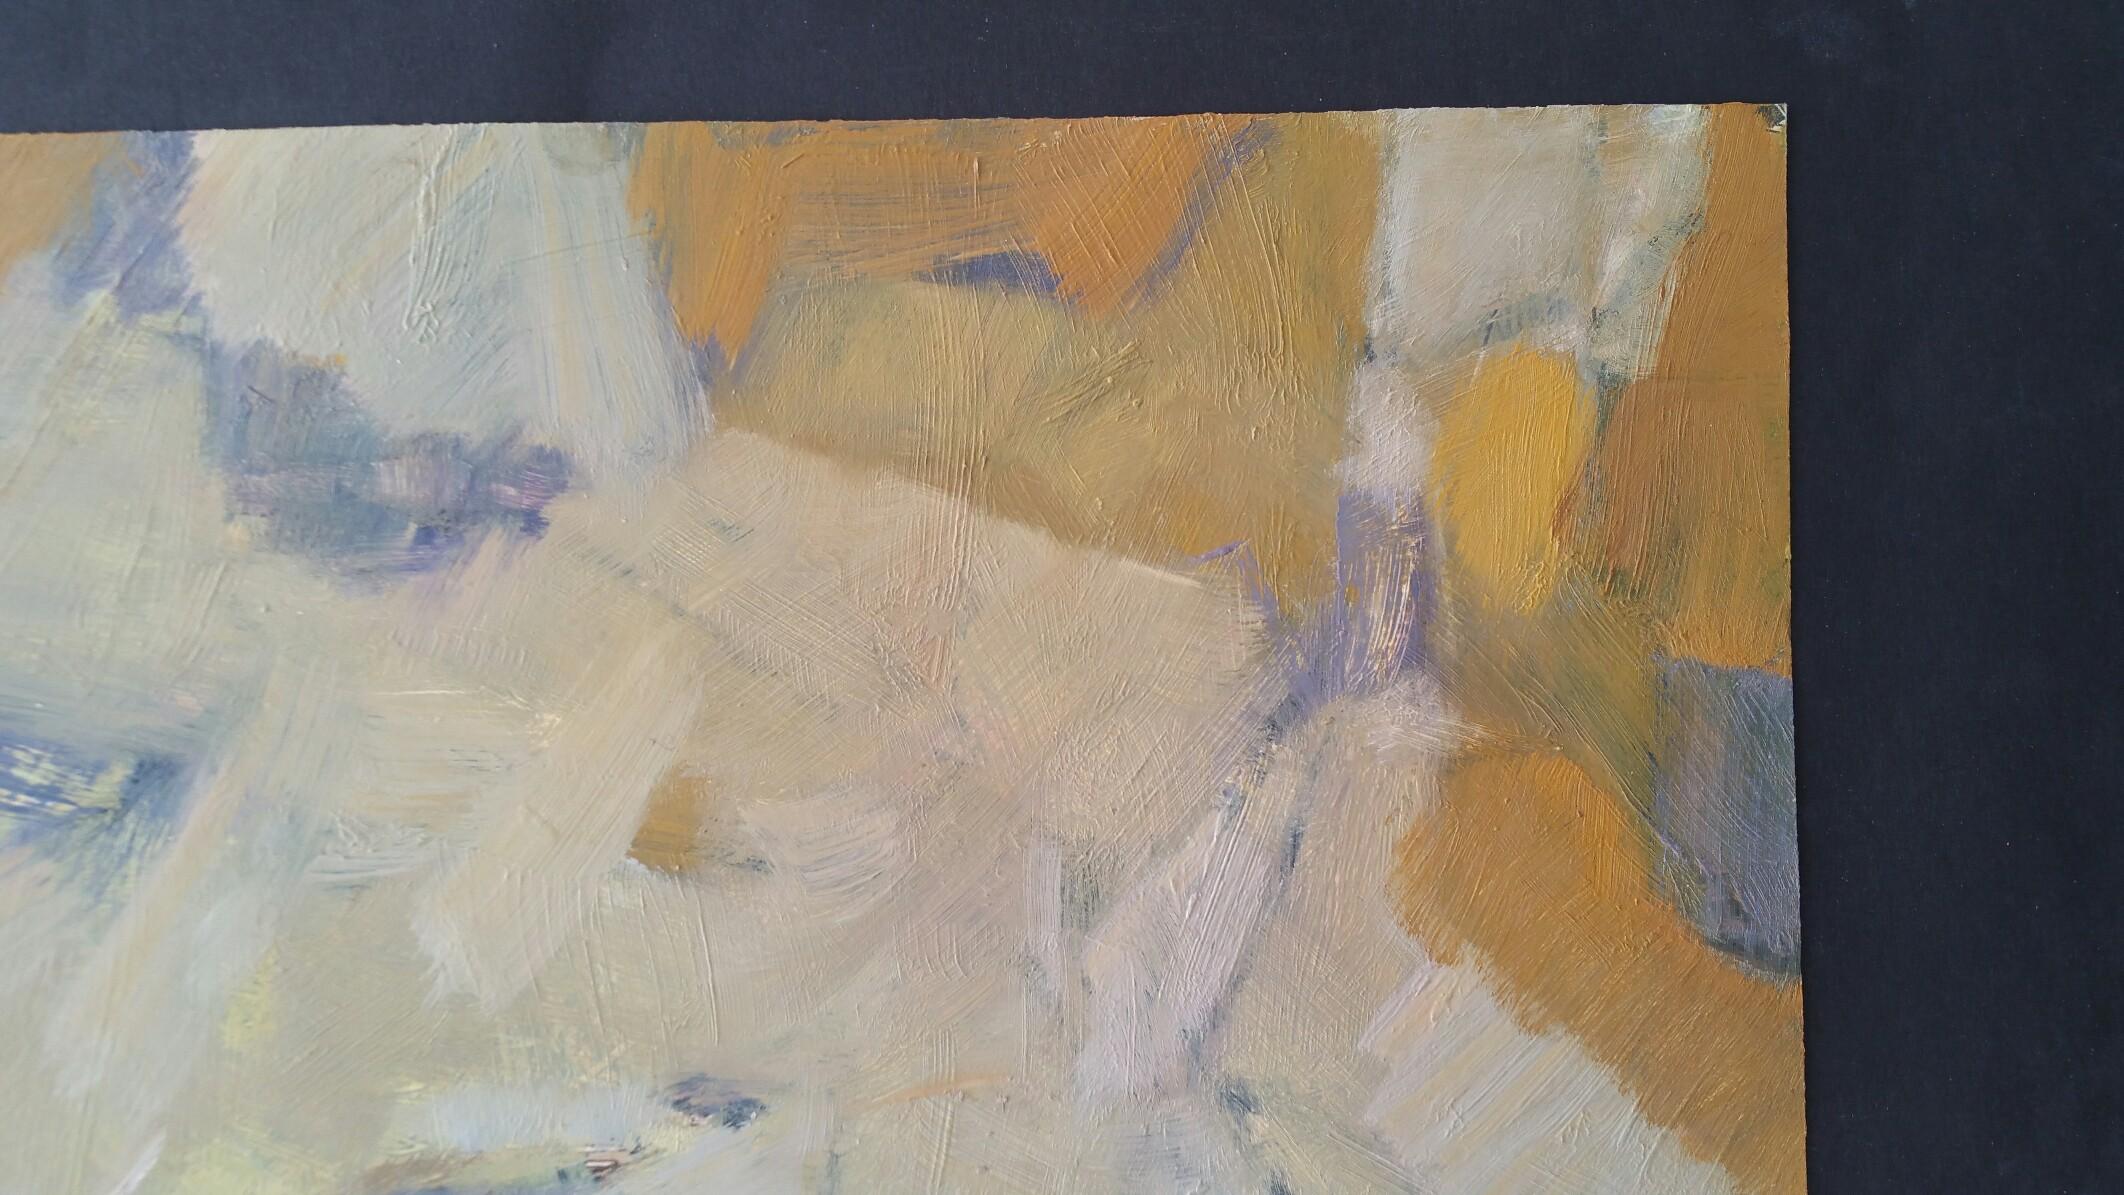 Parisian Abstract Expressionist Original Oil Painting - Stone Neutrals and Ochre - Gray Abstract Painting by Yvette Dubois Habasque